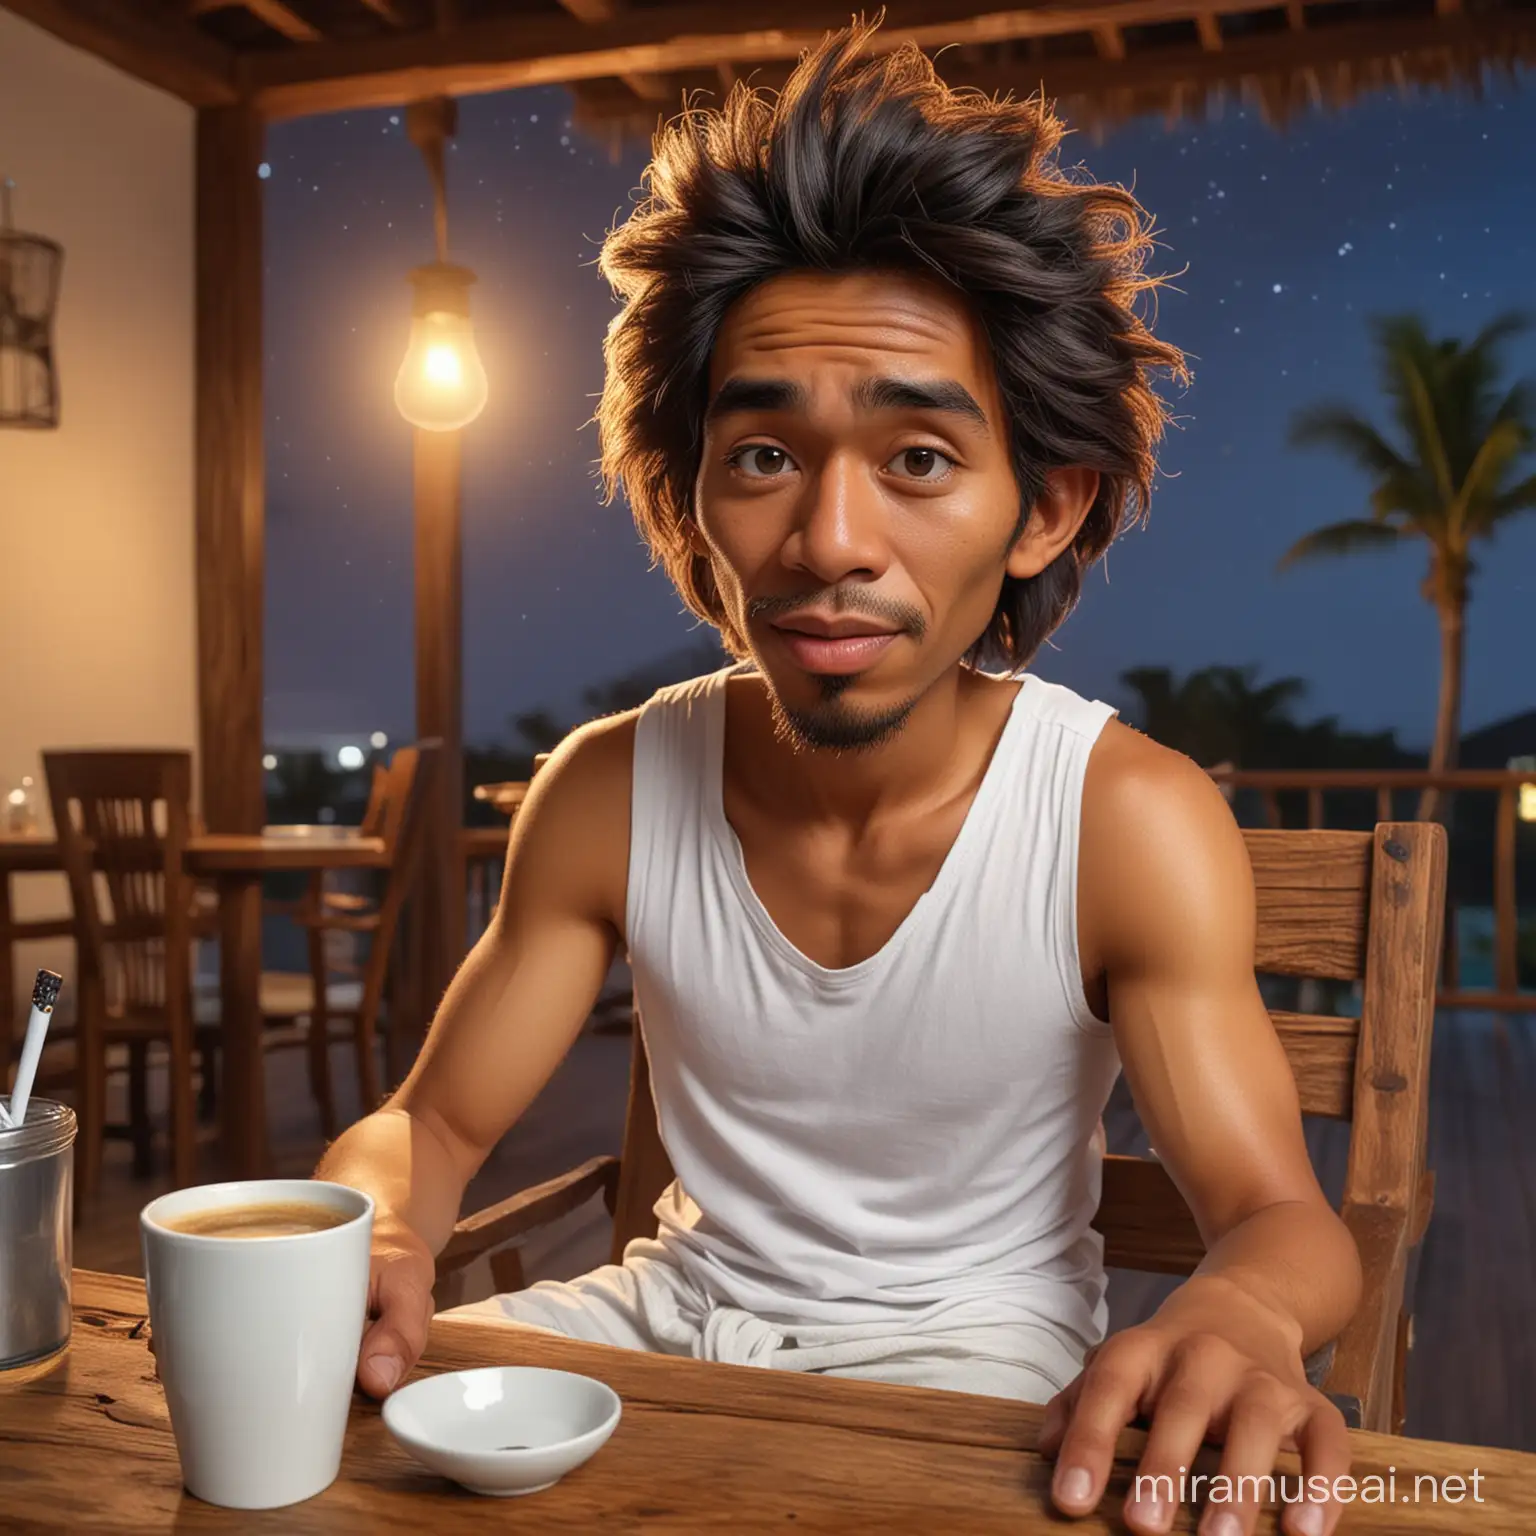 Indonesian Man Relaxing with Coffee and Cigarette at Night